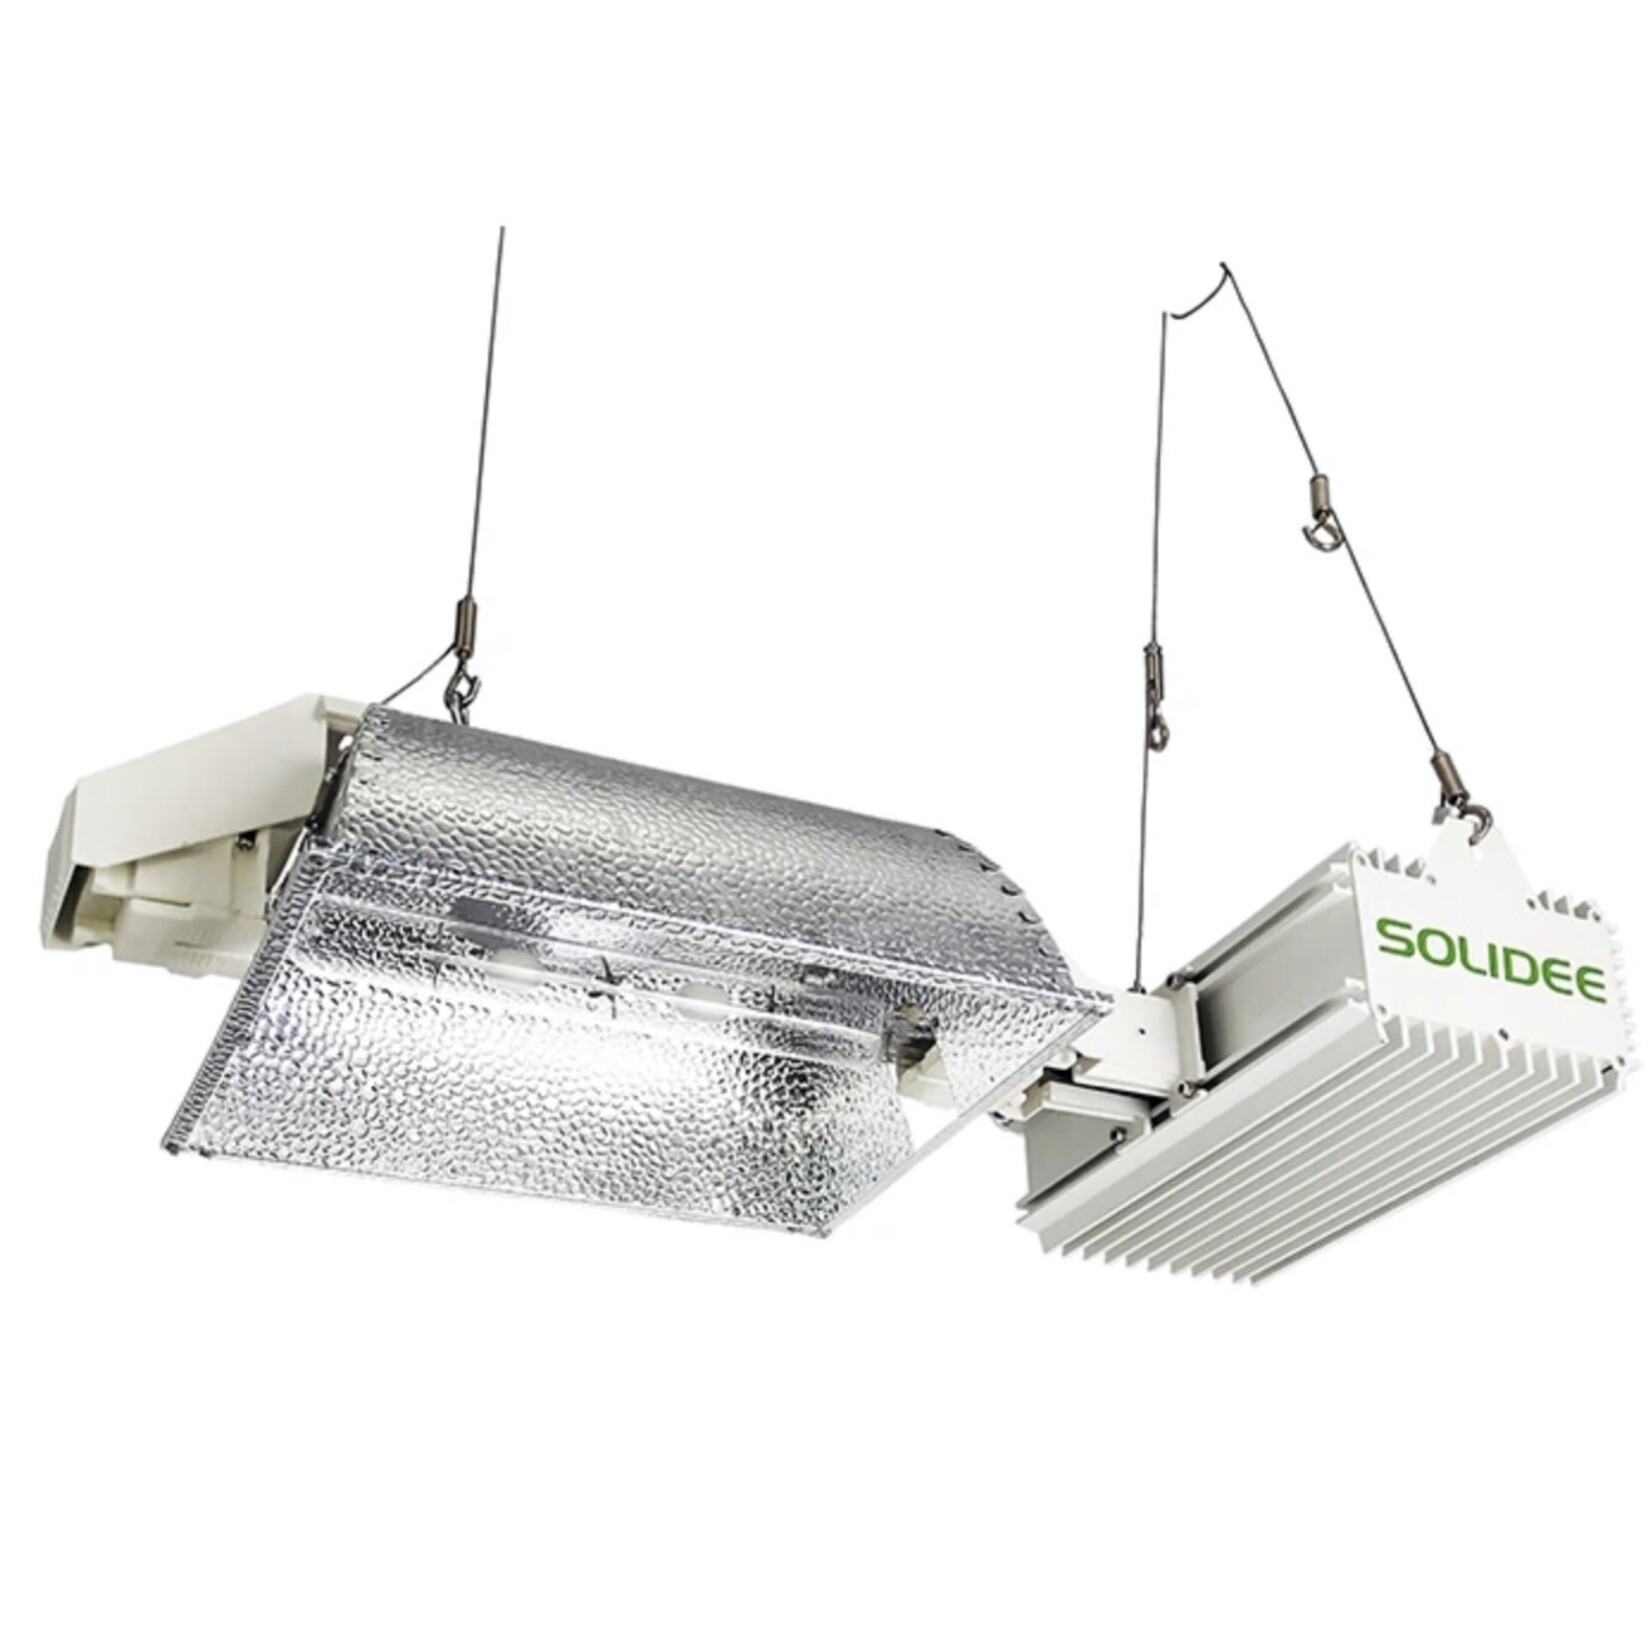 Discount Central Solidee grow light